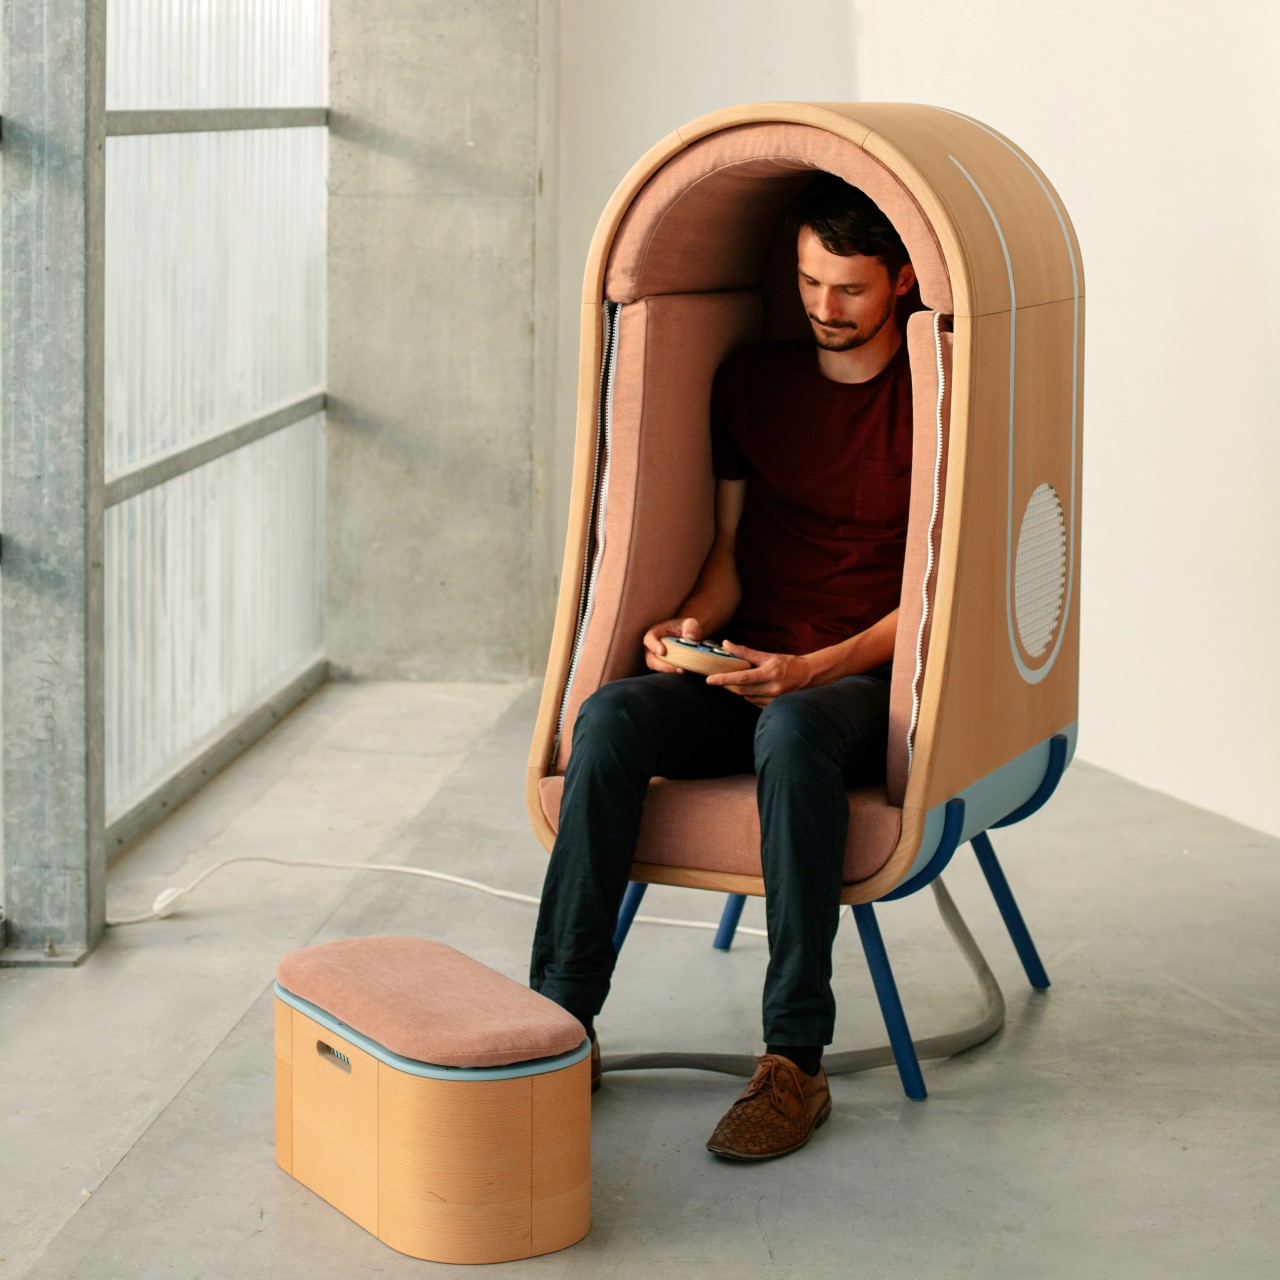 James Dyson Award-Winner OTO Chair for Autistic People